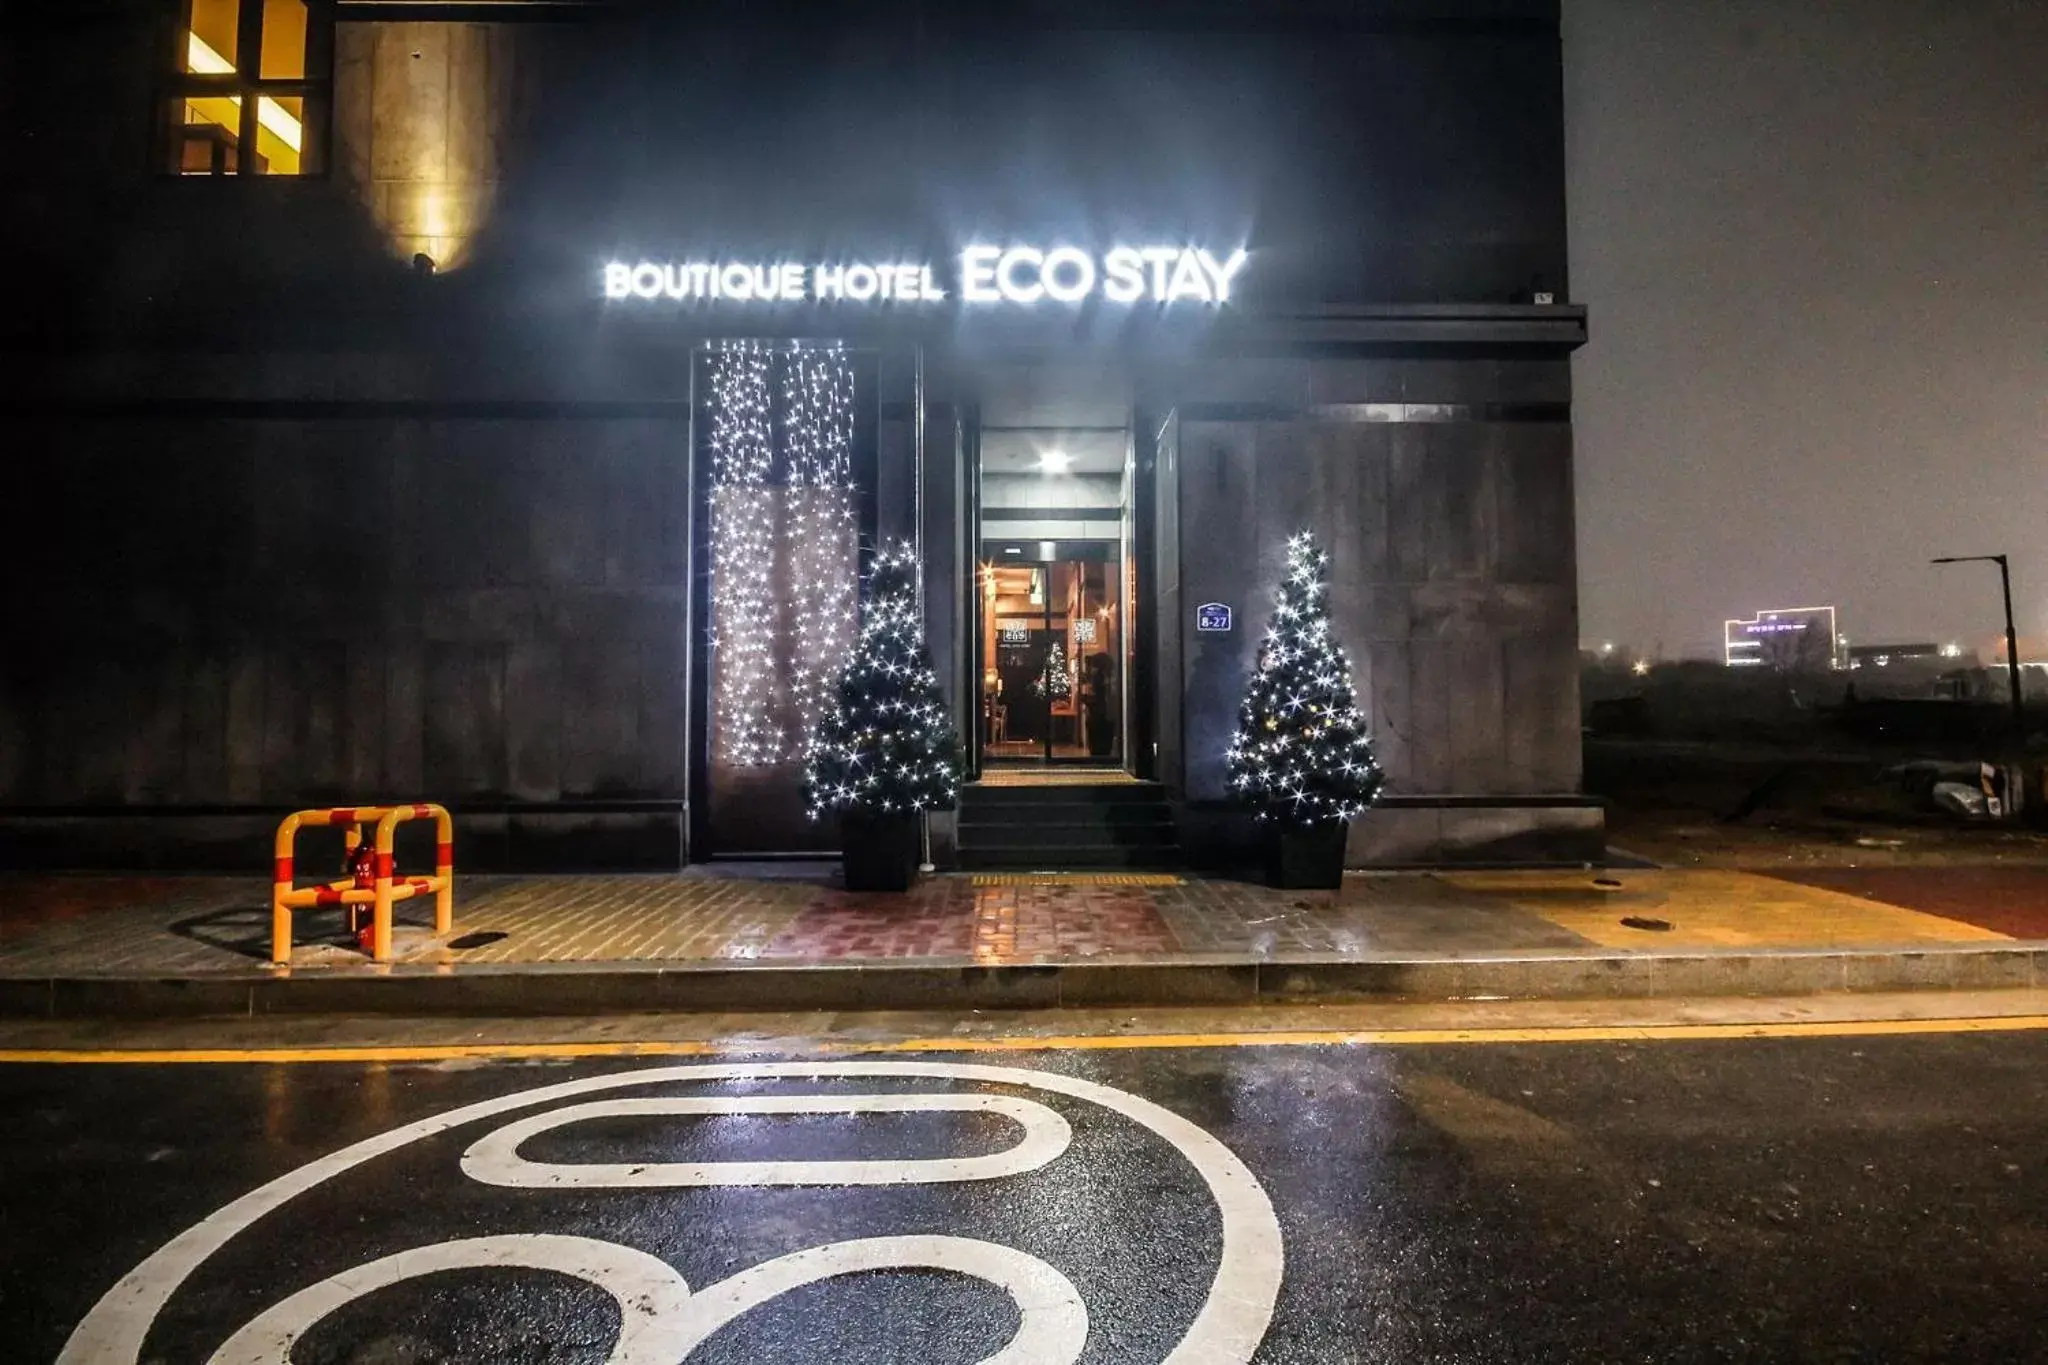 Hotel Eco stay